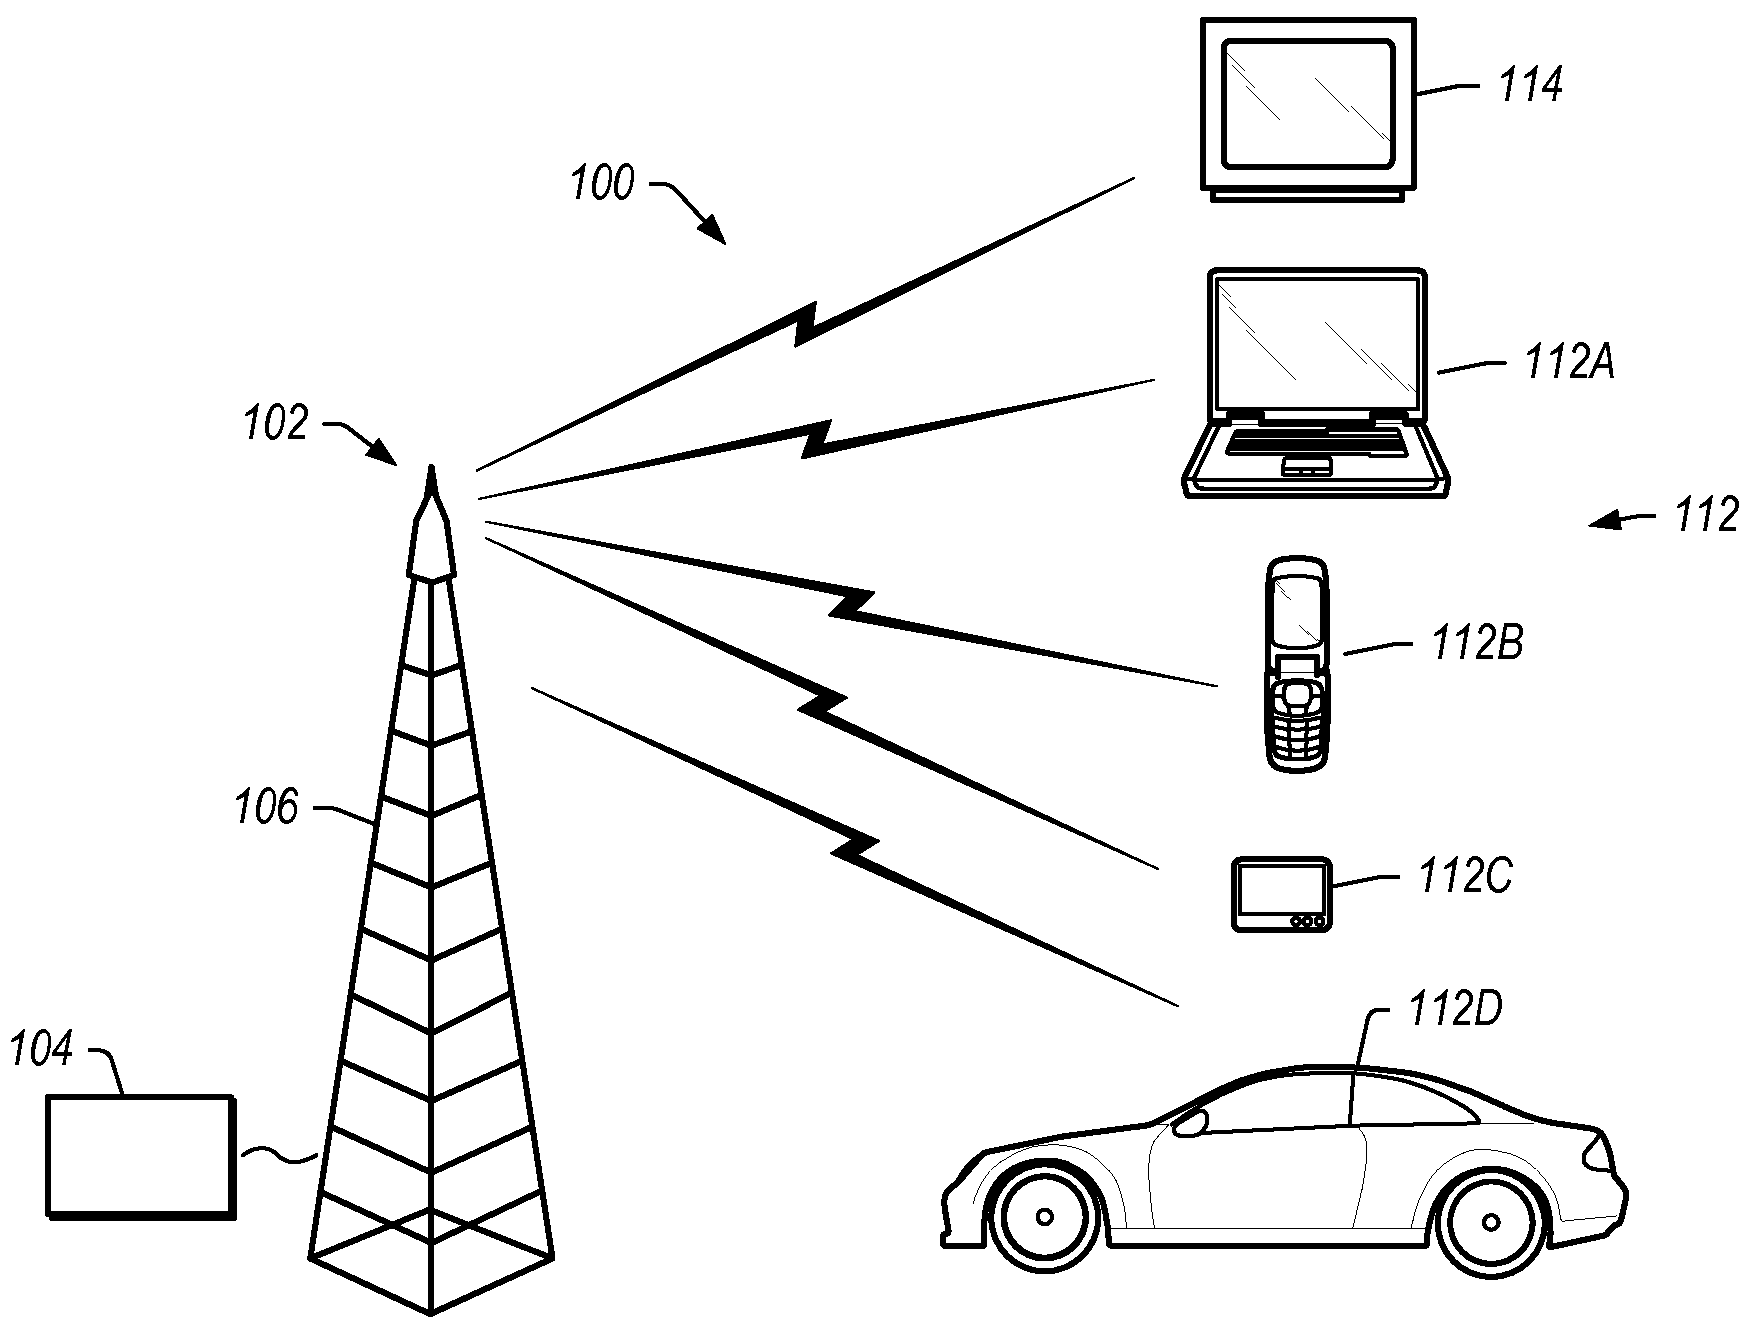 Transmission of Multimedia Streams to Mobile Devices With Cross Stream Association